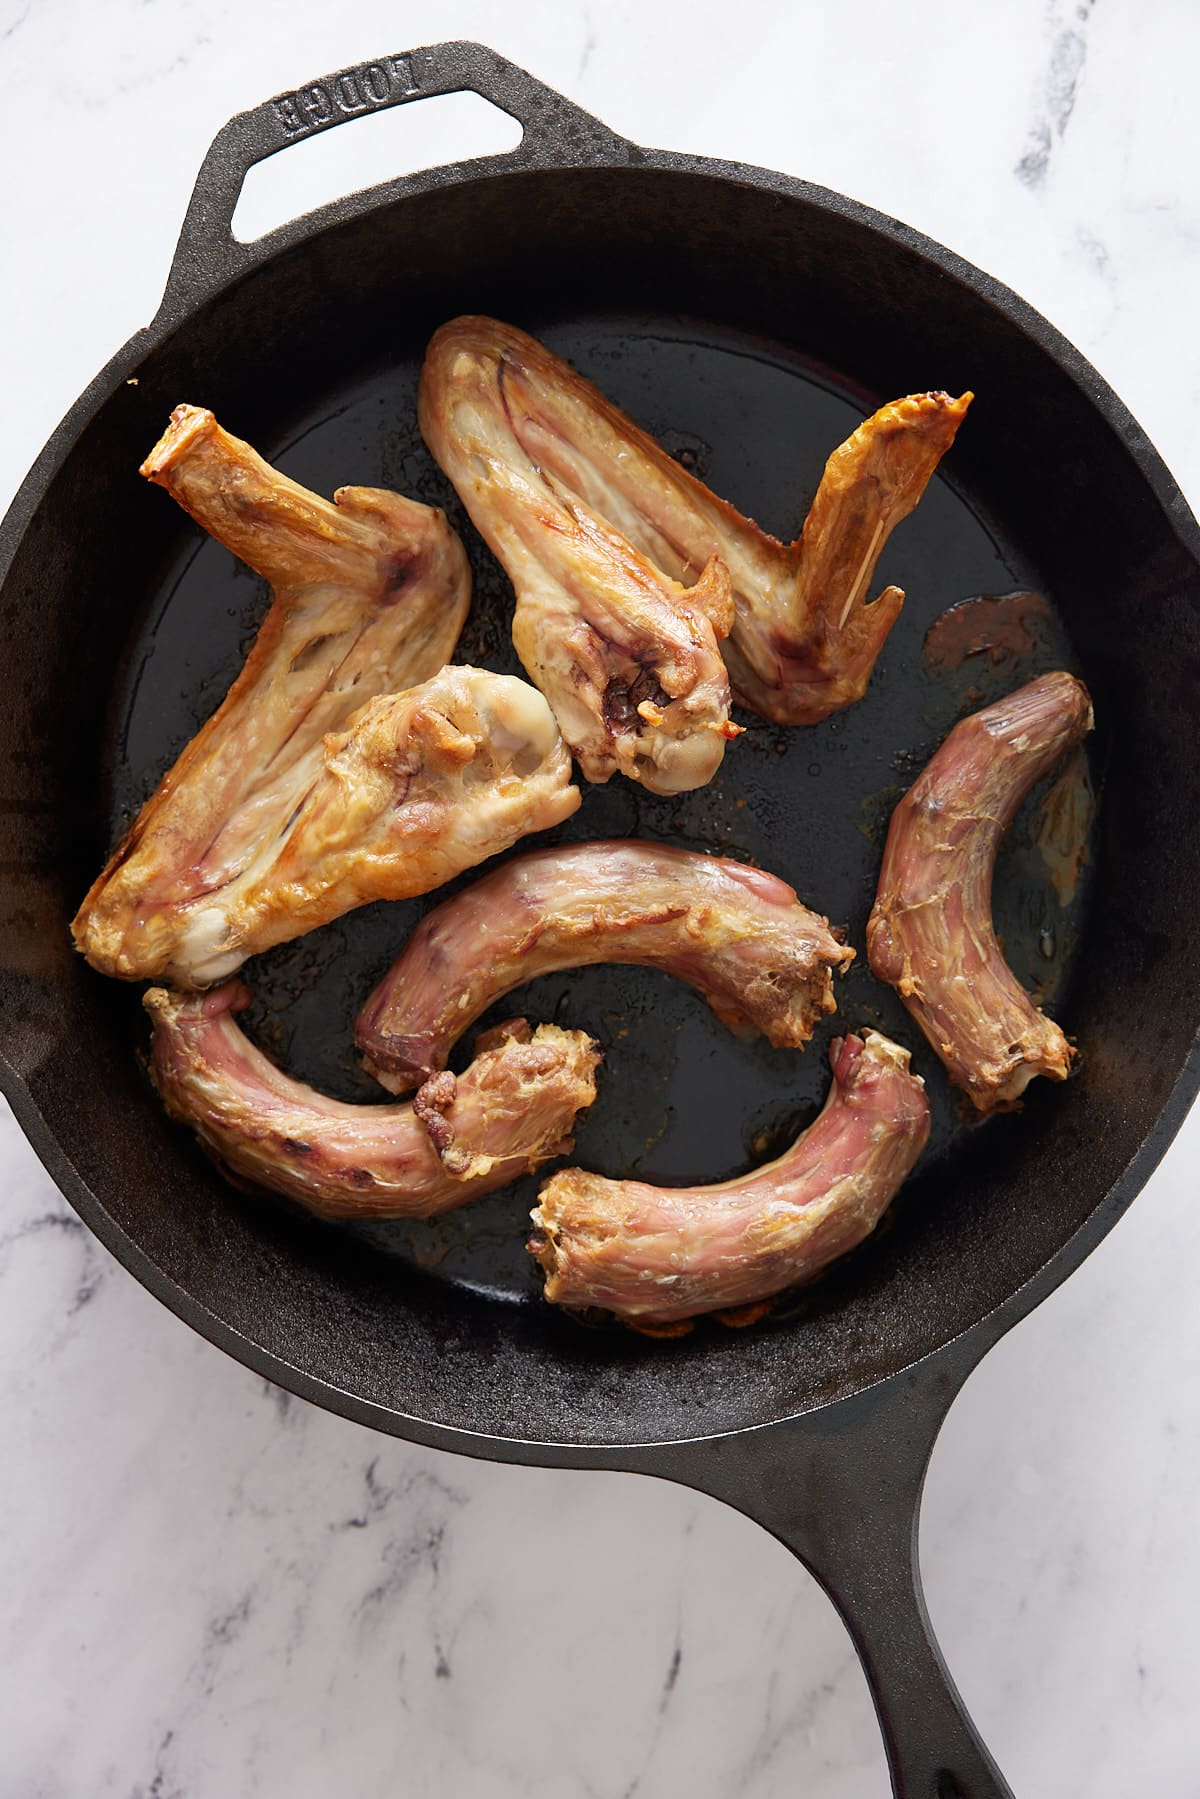 Cast iron skillet with roasted turkey wings and neck